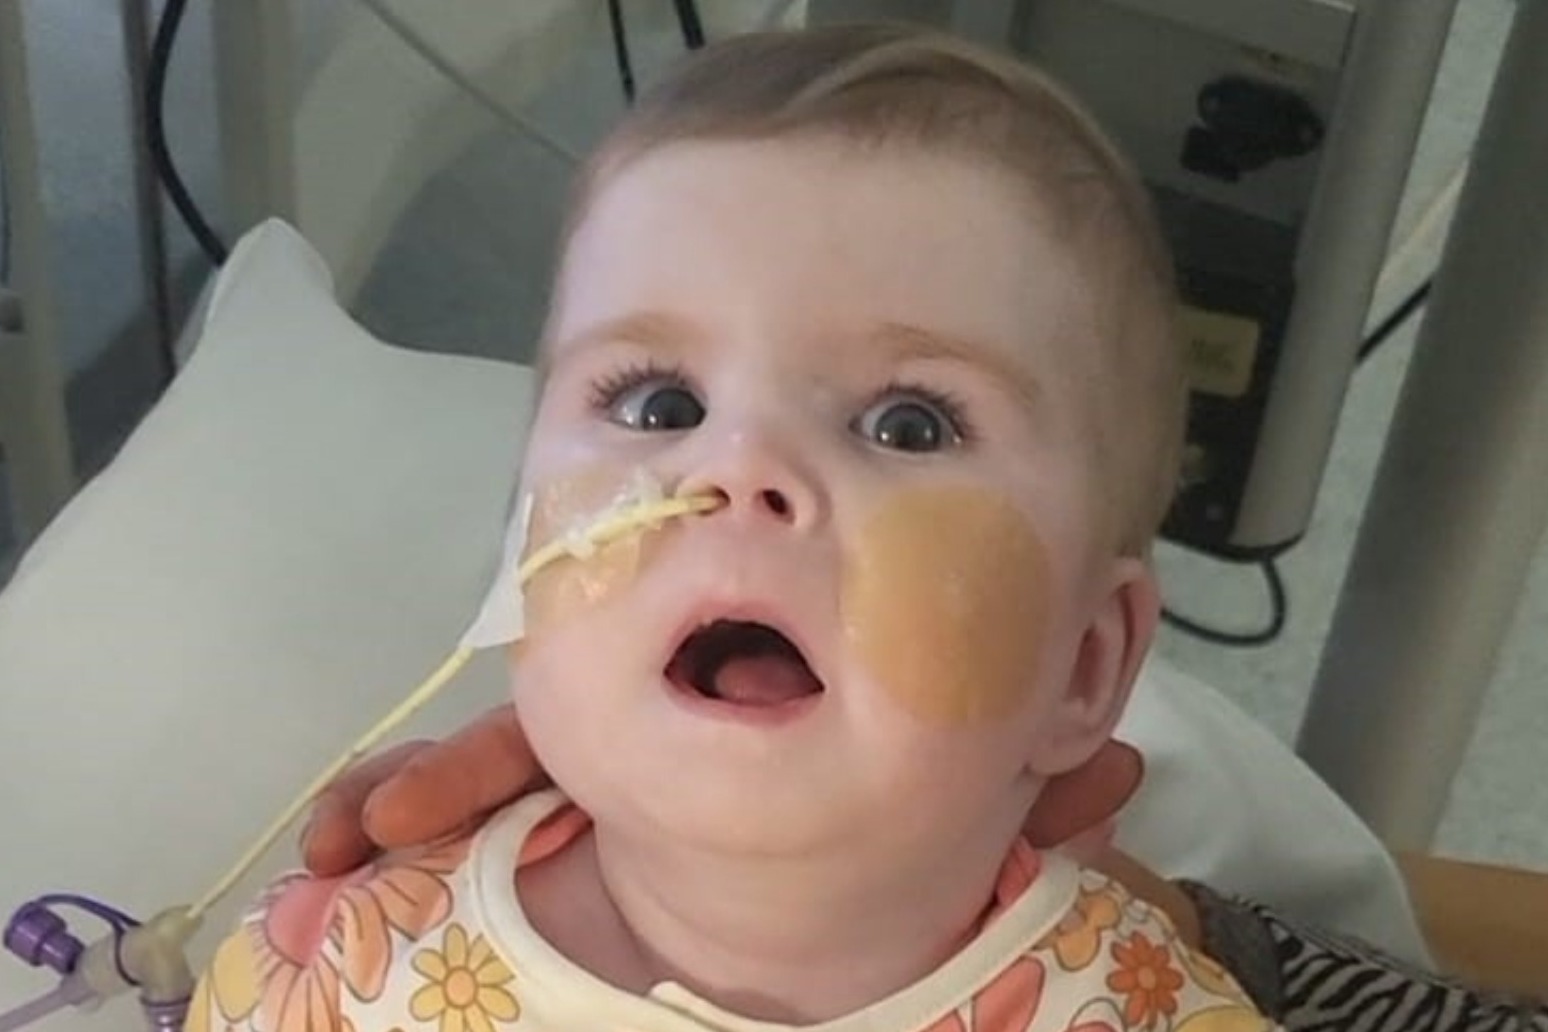 Critically ill baby’s parents lose another round of life-support treatment fight 